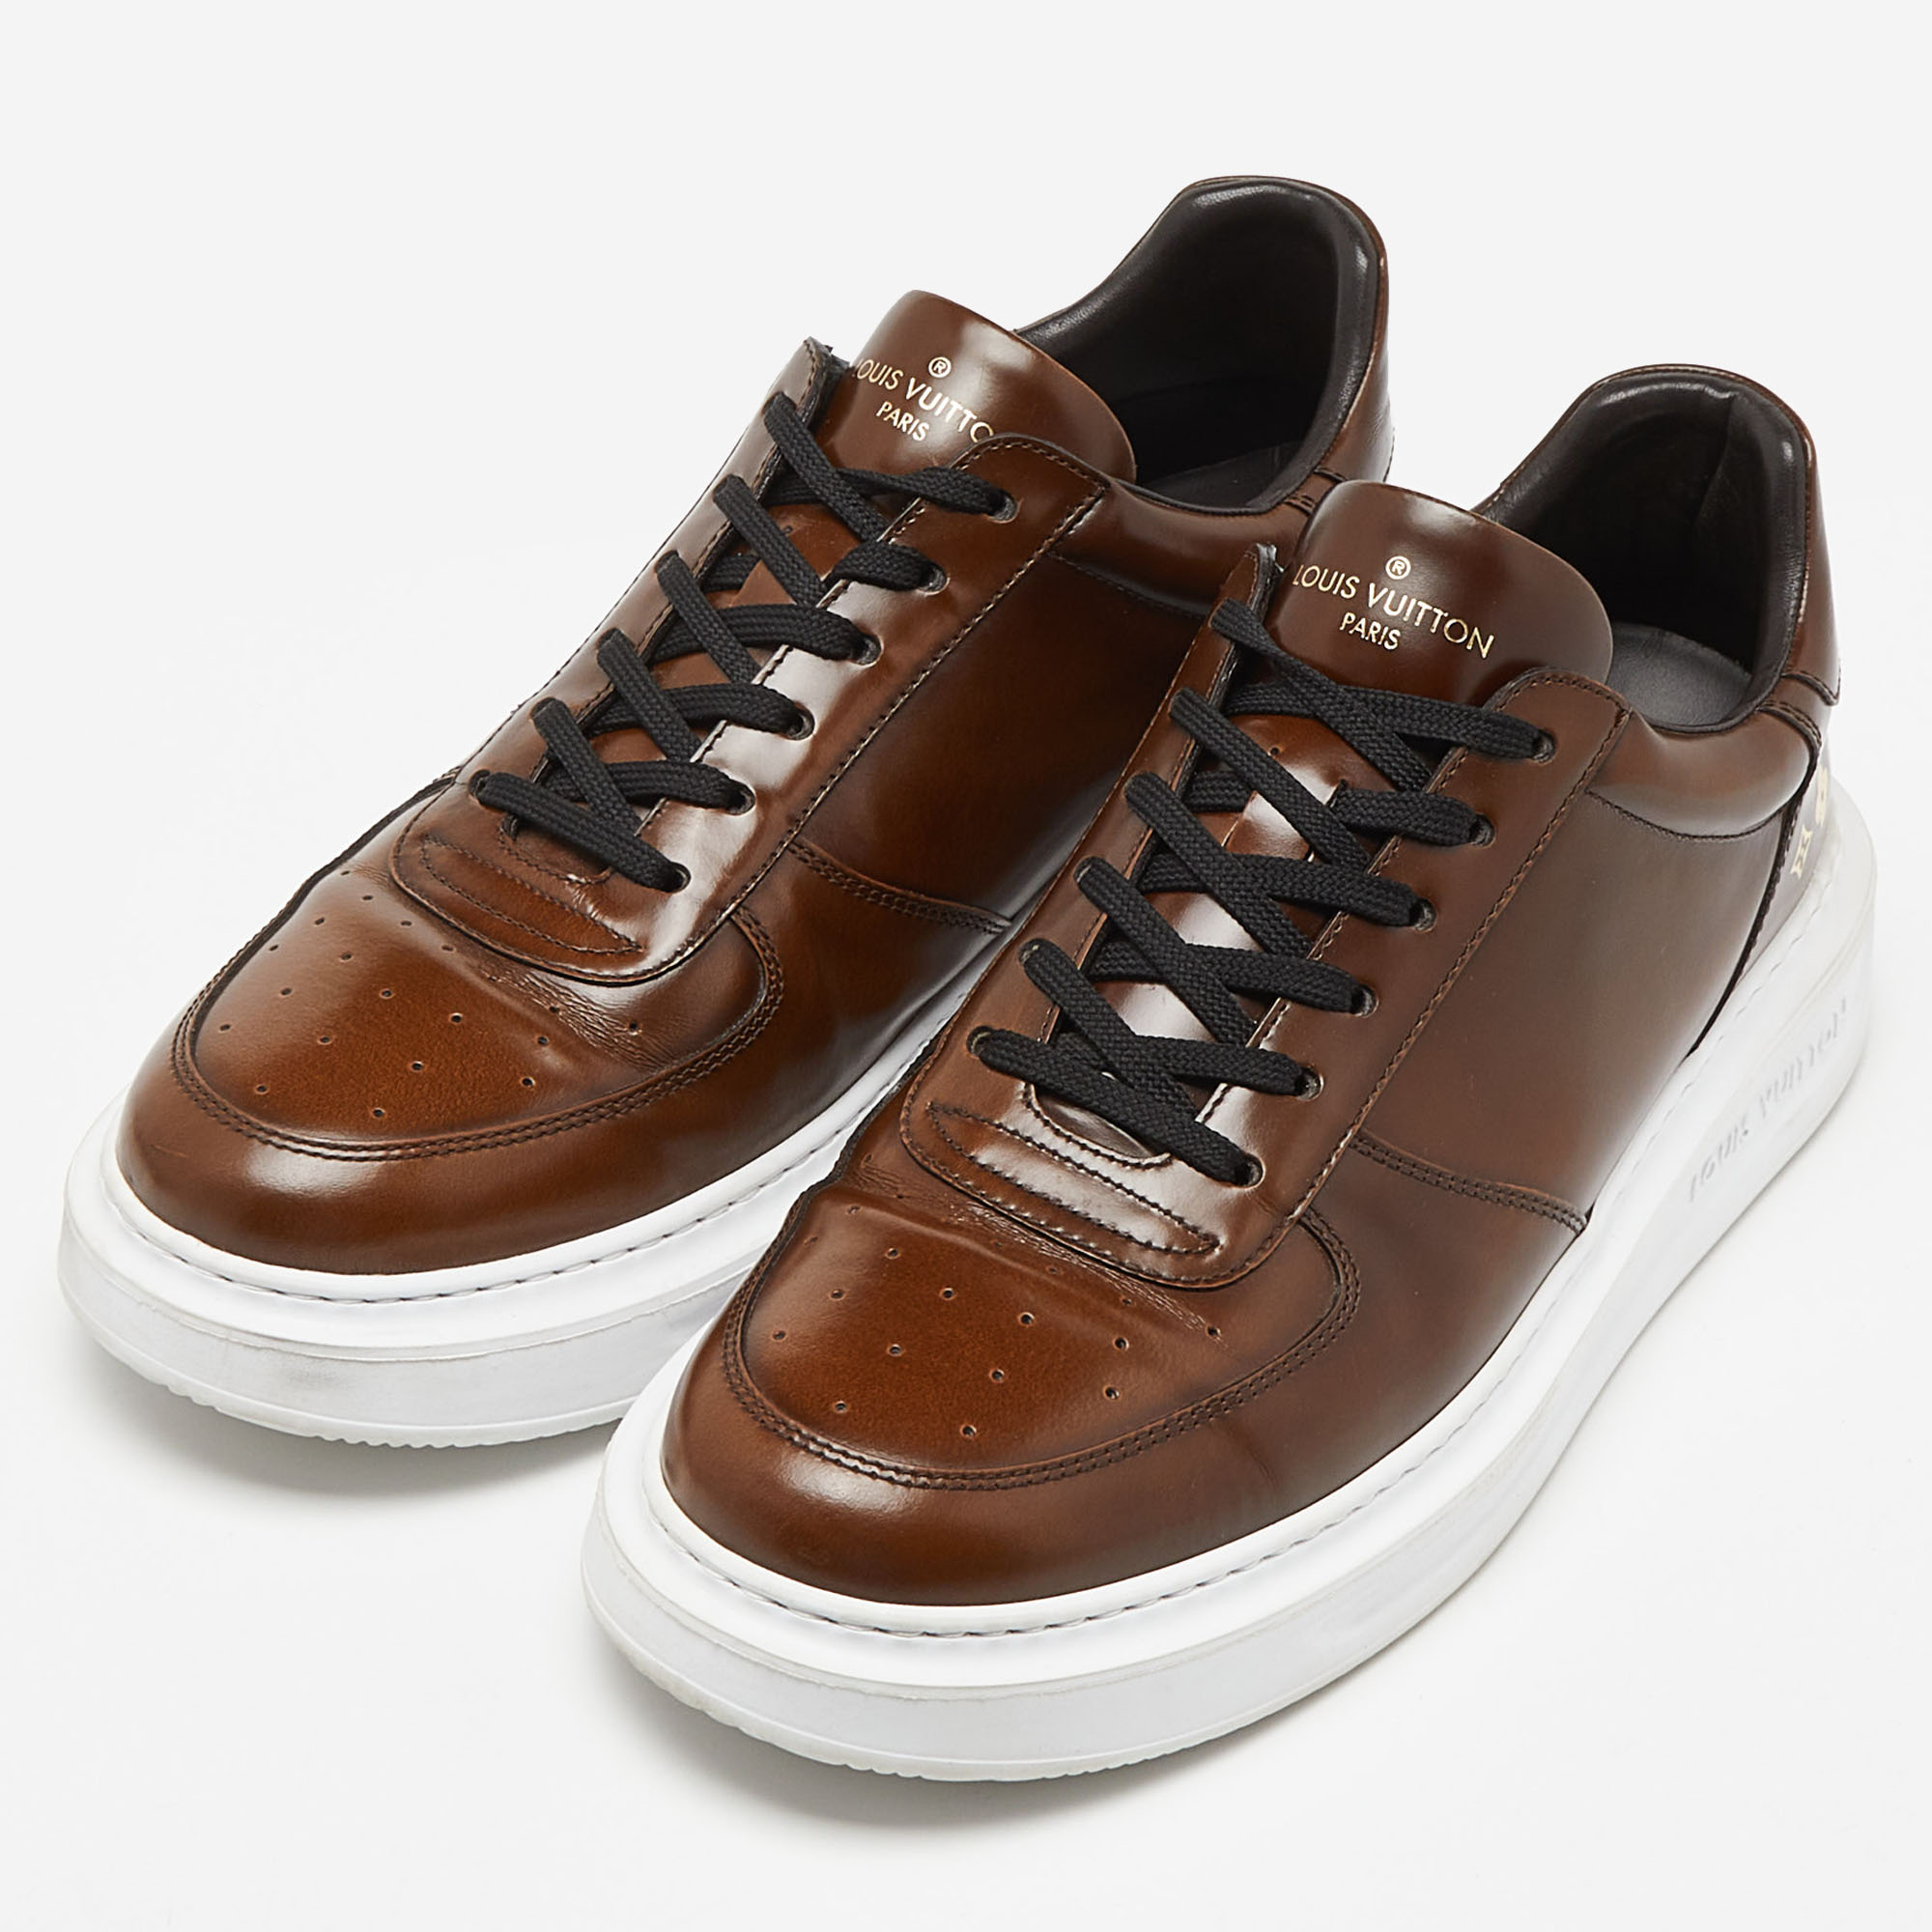 

Louis Vuitton Brown Leather Beverly Hills Sneakers Size